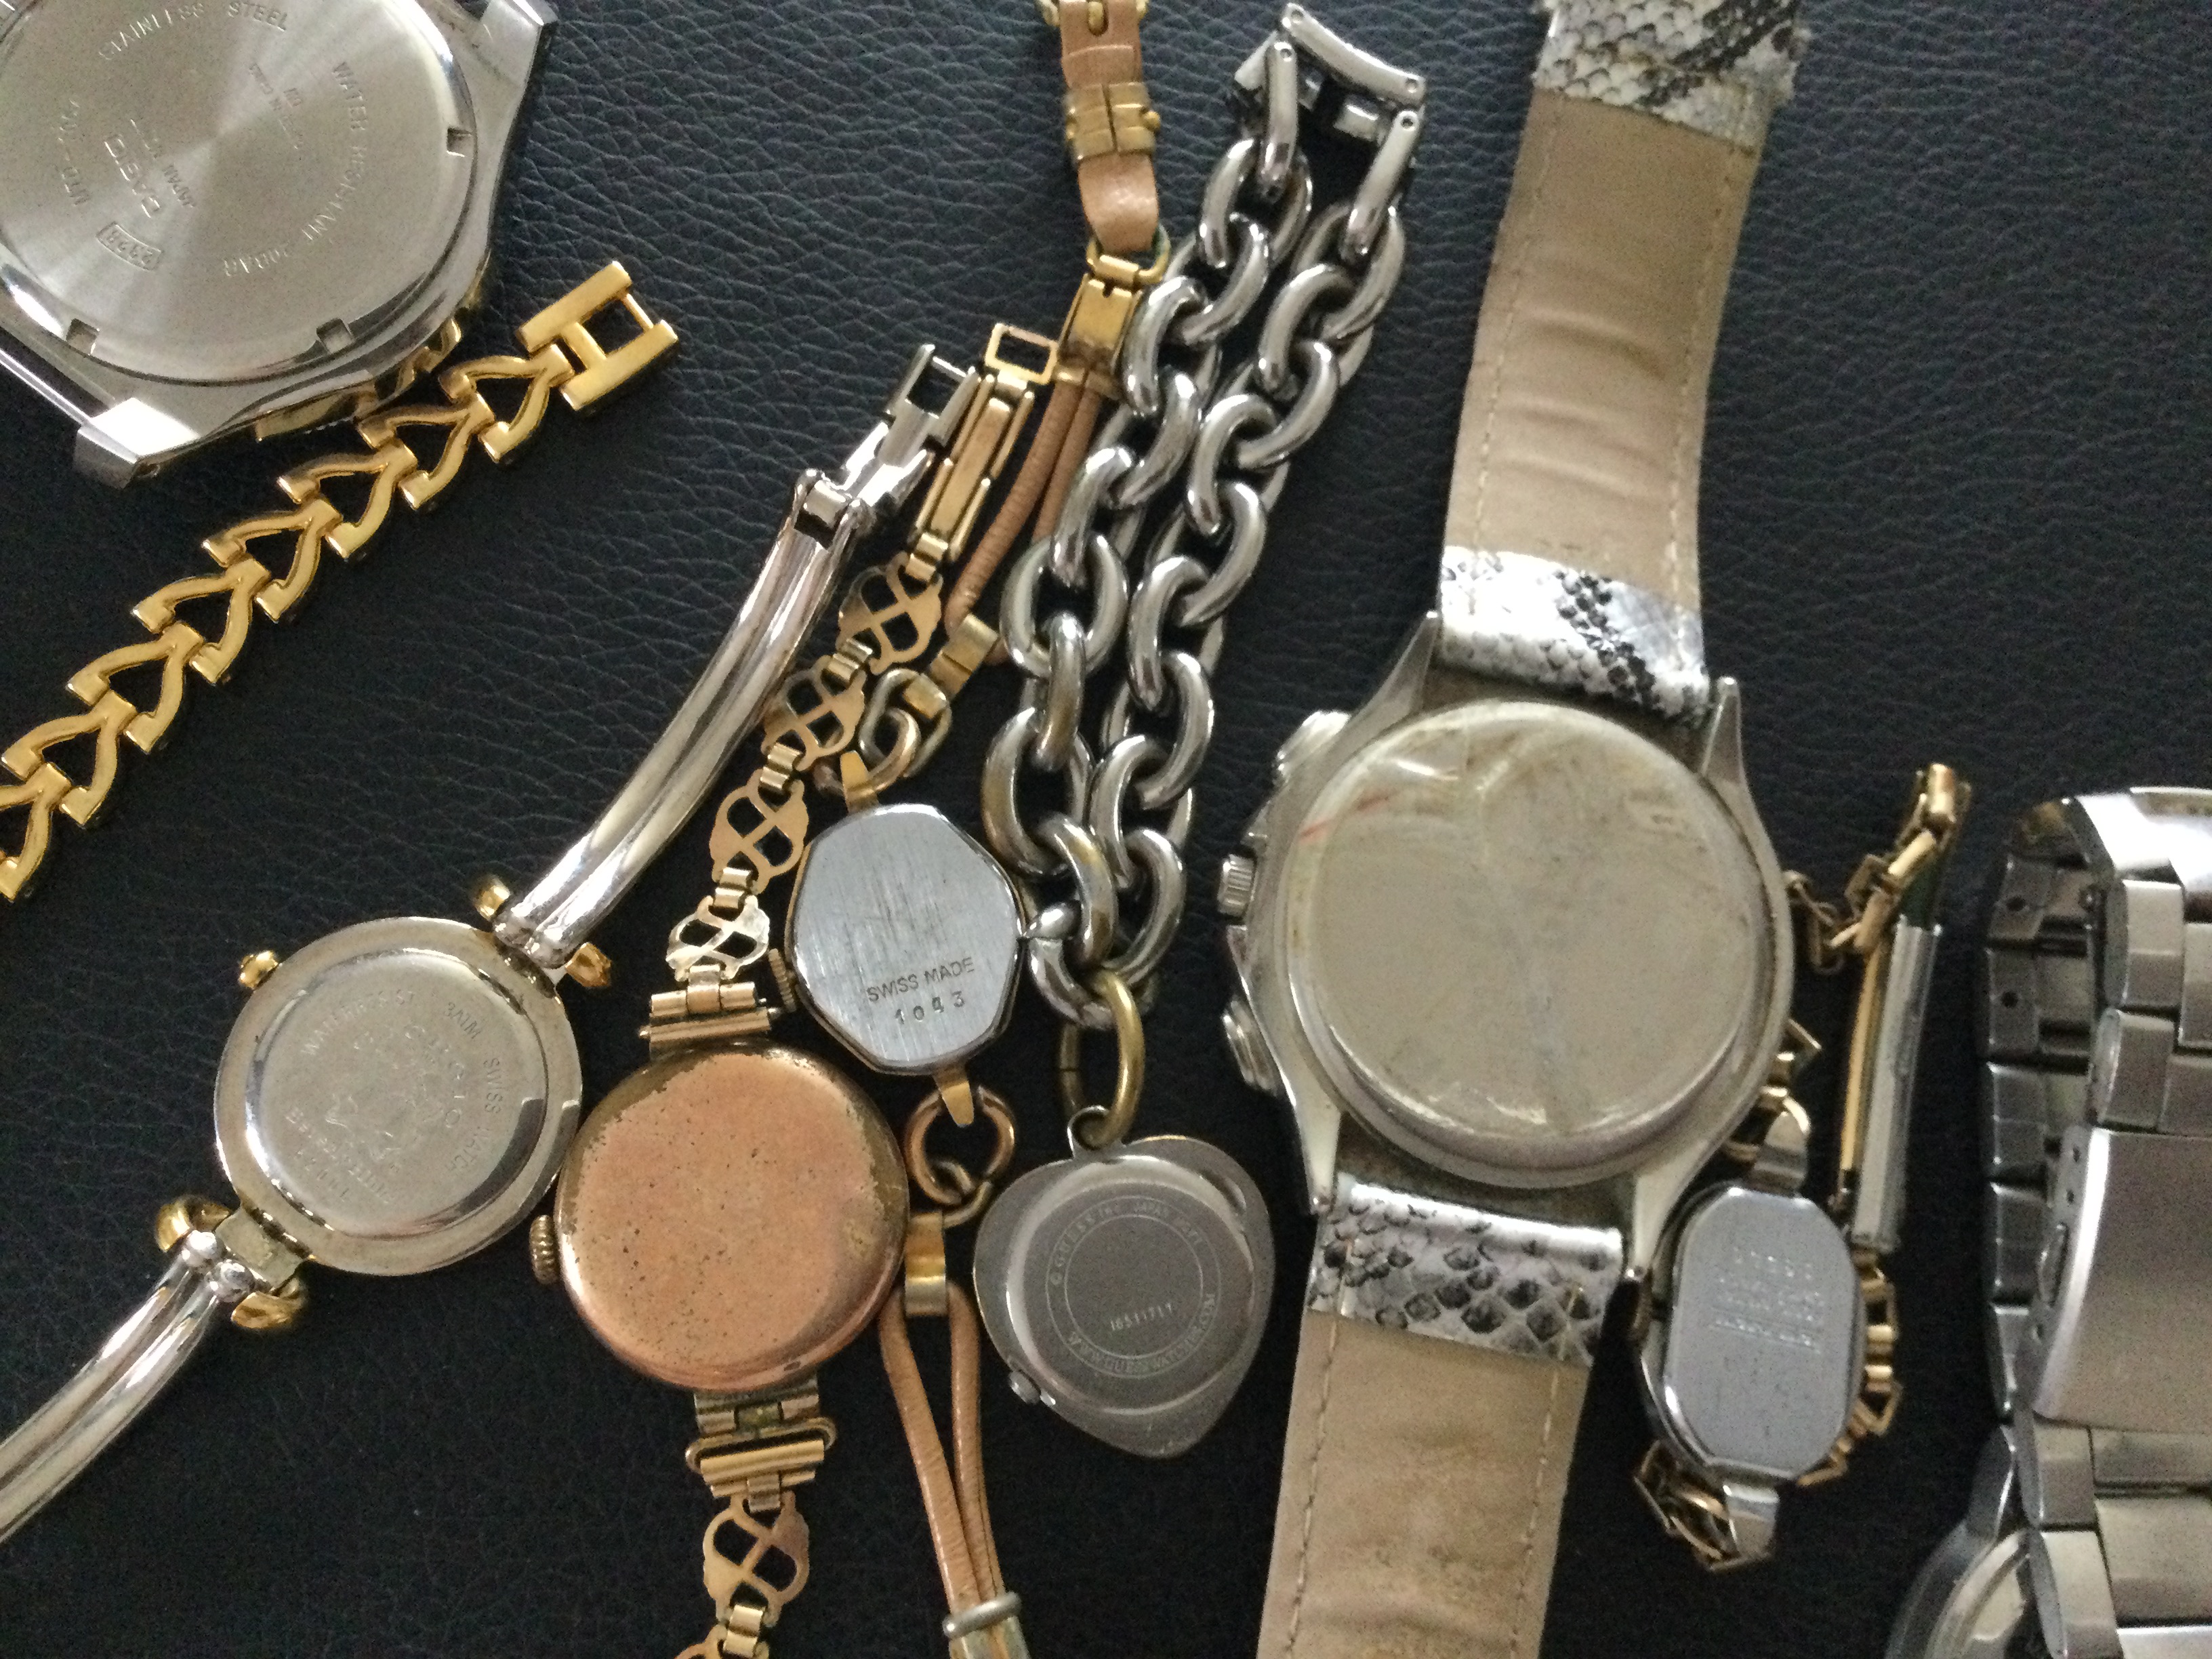 Collection of 11 Watches, Next, Cavalli, Ice, Giorgio, Nelson Etc (GS 29) - Image 6 of 7